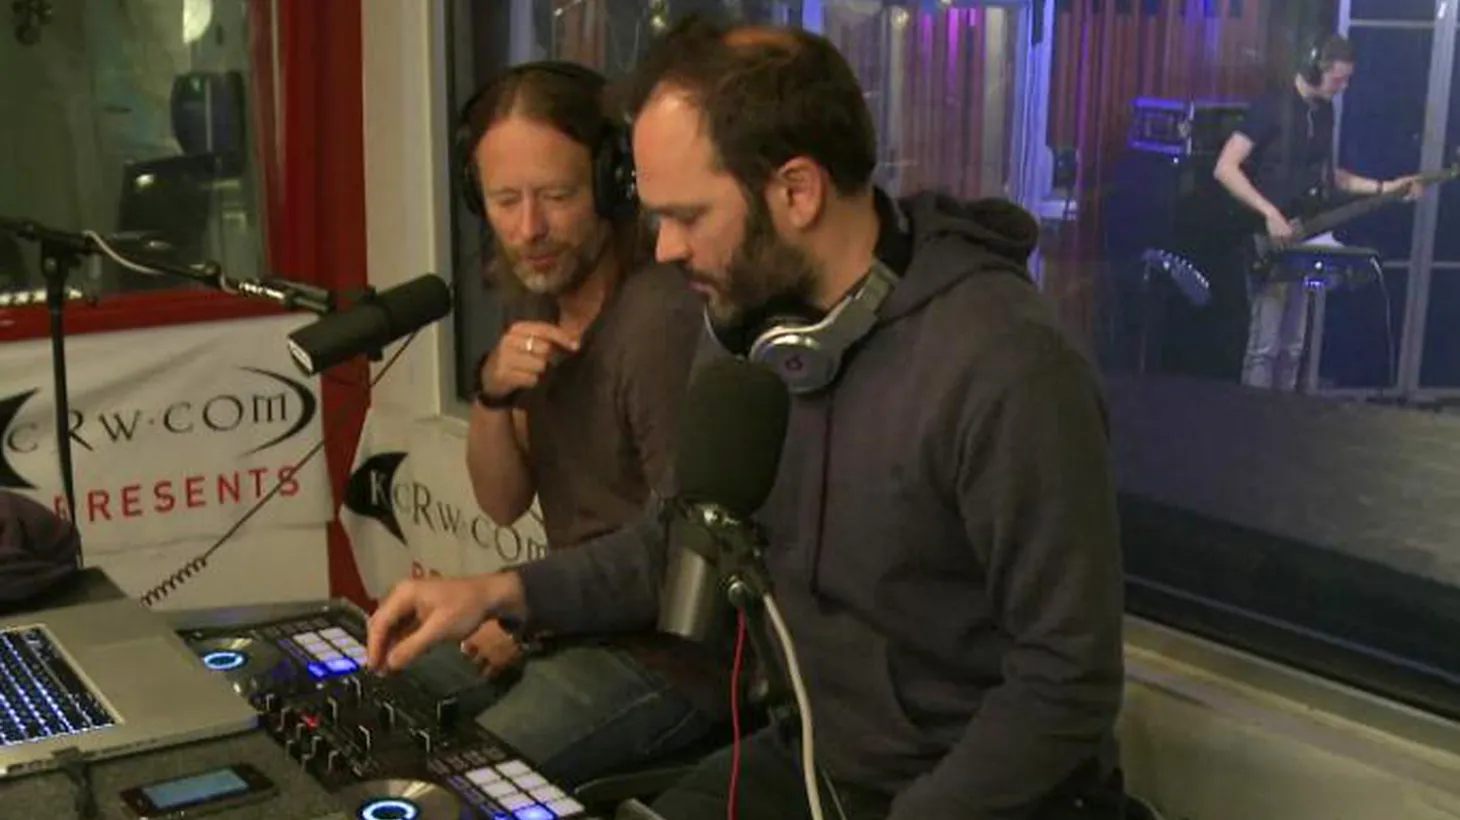 Thom Yorke and Nigel Godrich have teamed up on many projects, from Radiohead to Atoms for Peace. They join forces for an unprecedented DJ set in our studios. (10AM)